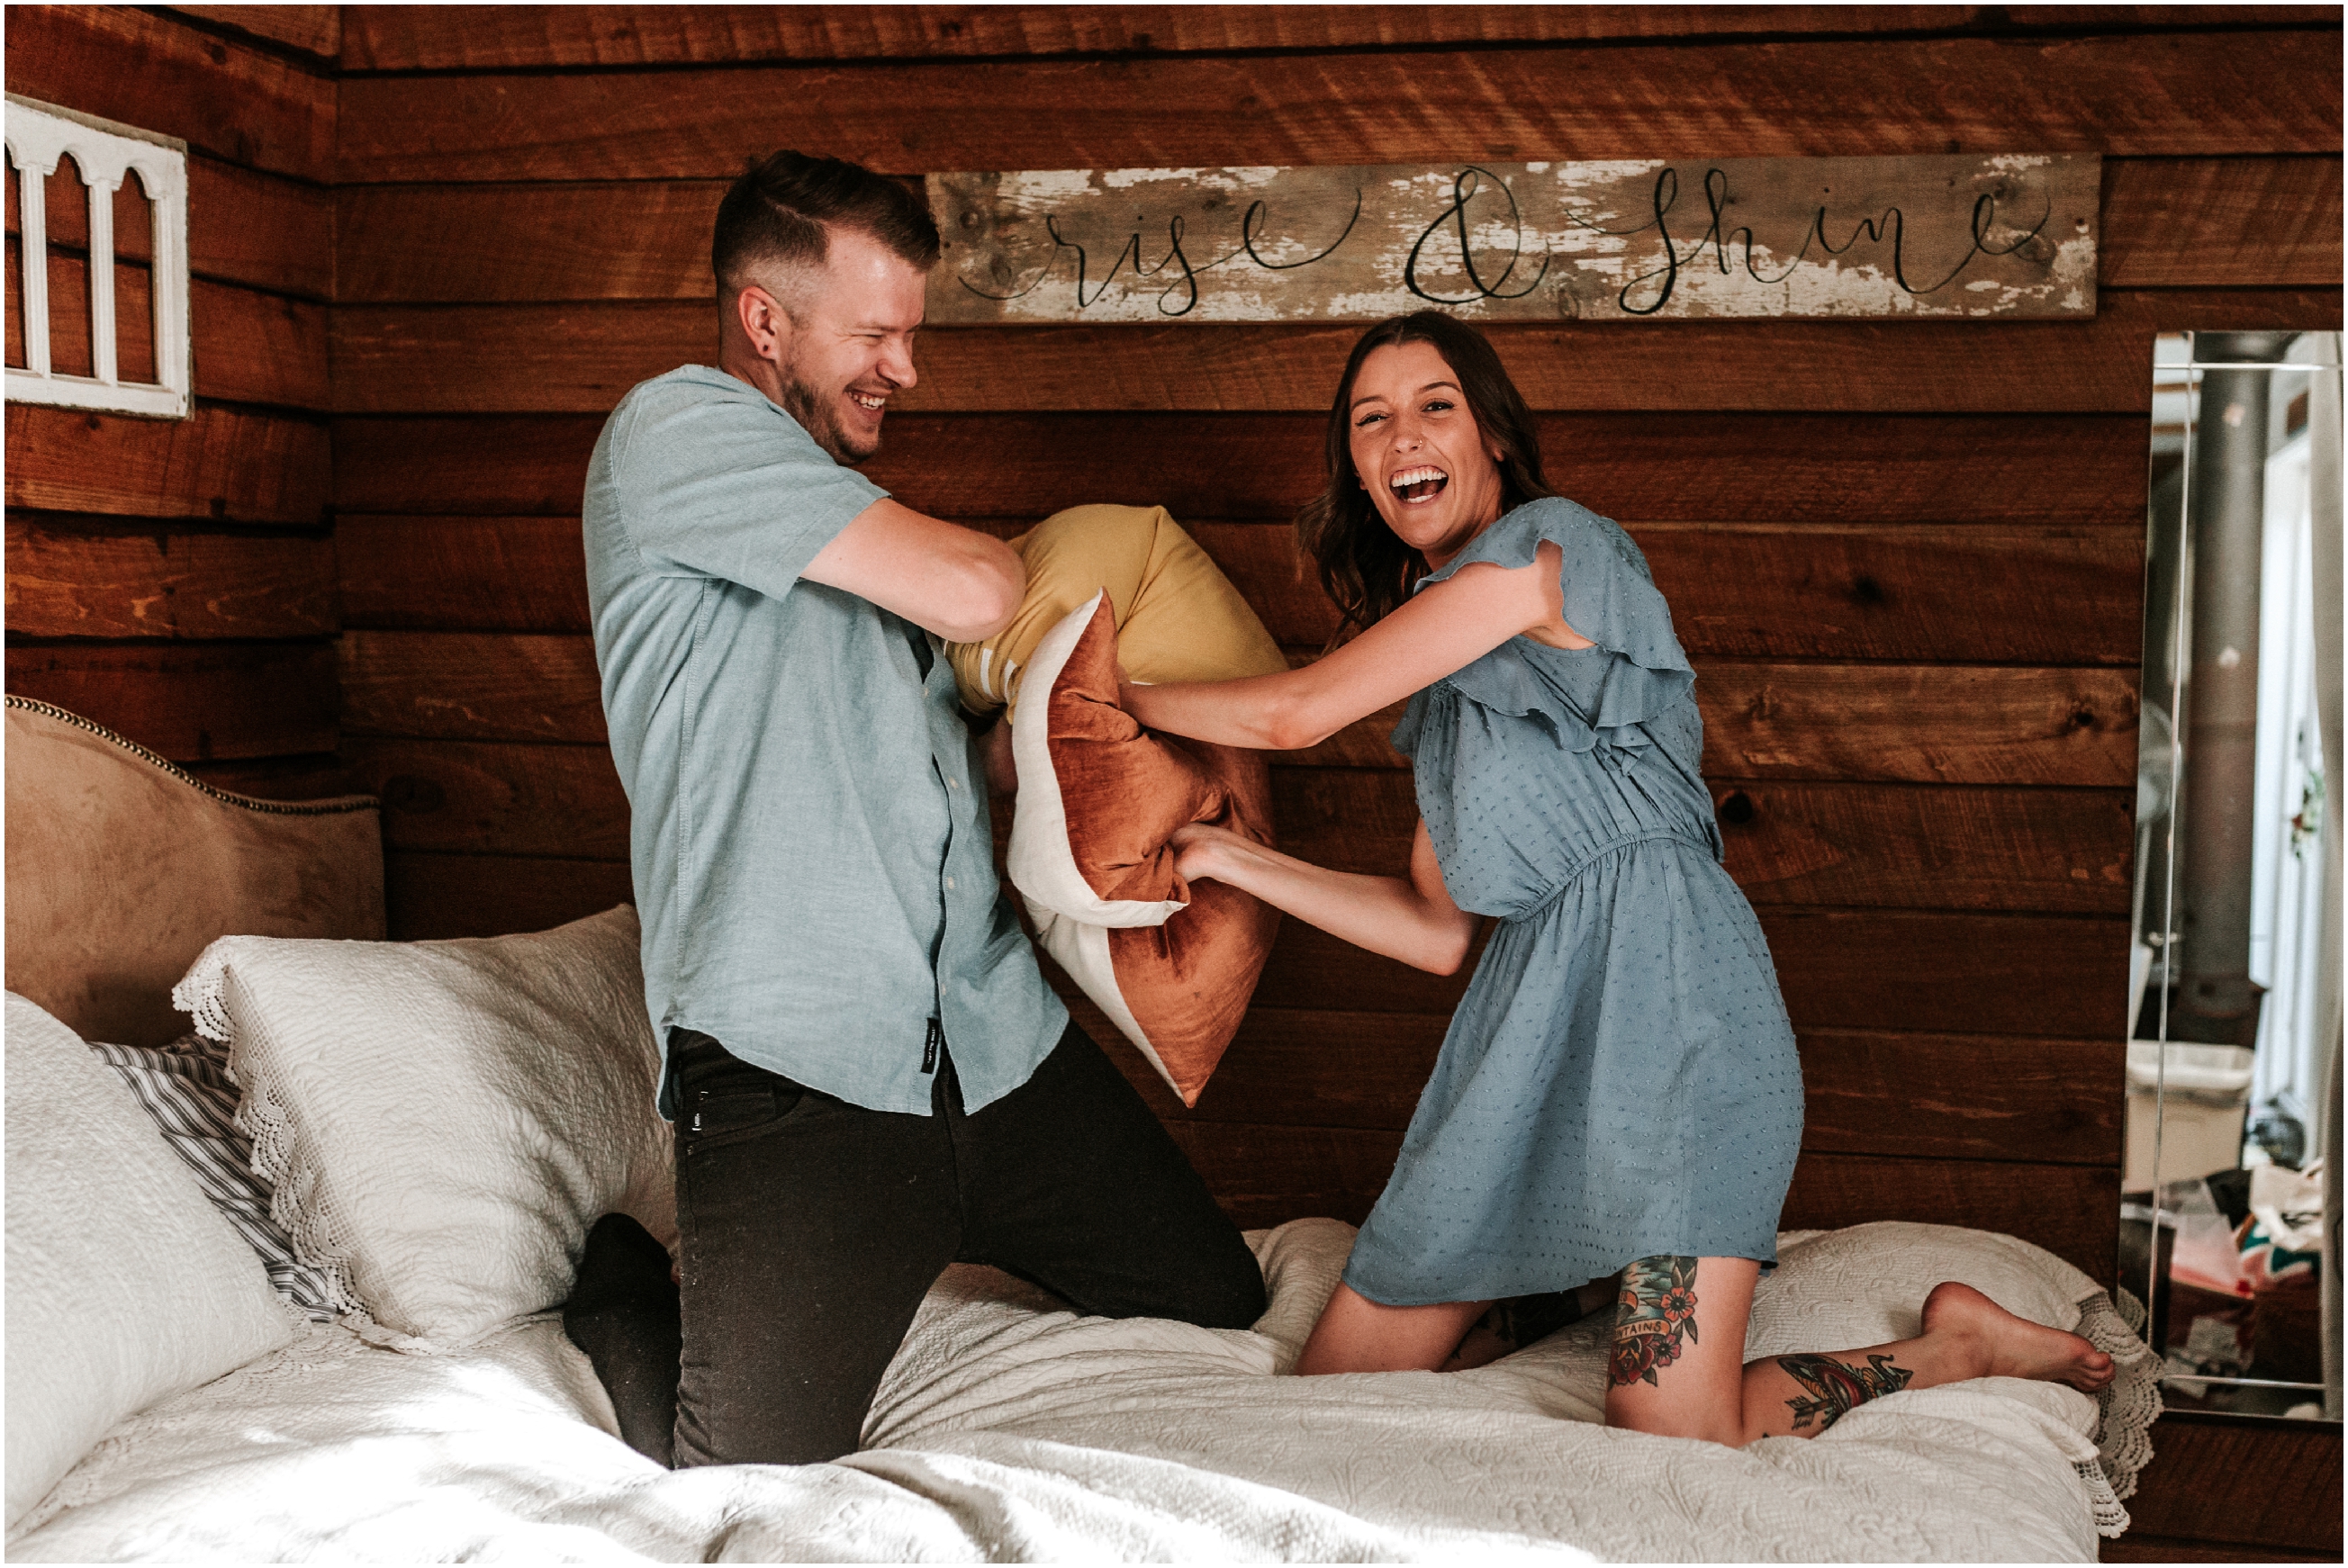 Sellersville Doylestown Pennsylvania In Home Pillow Fight Farm Engagement Session New Jersey Wedding Photographer